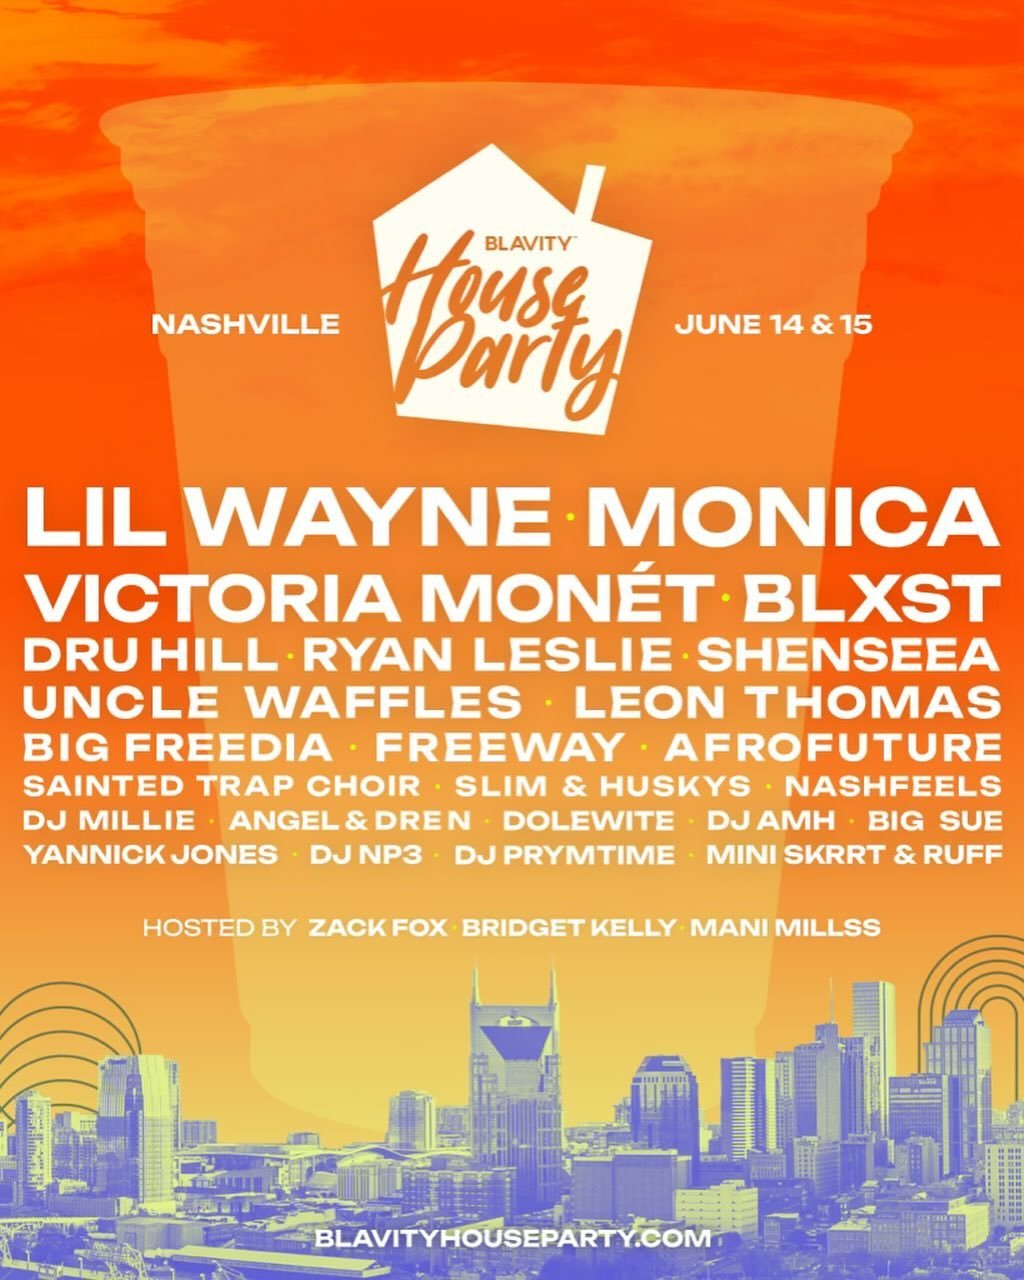 On June 14th, @monicadenise will headline @blavityhouseparty in Nashville! Grab your tickets at the link in bio 🎟️